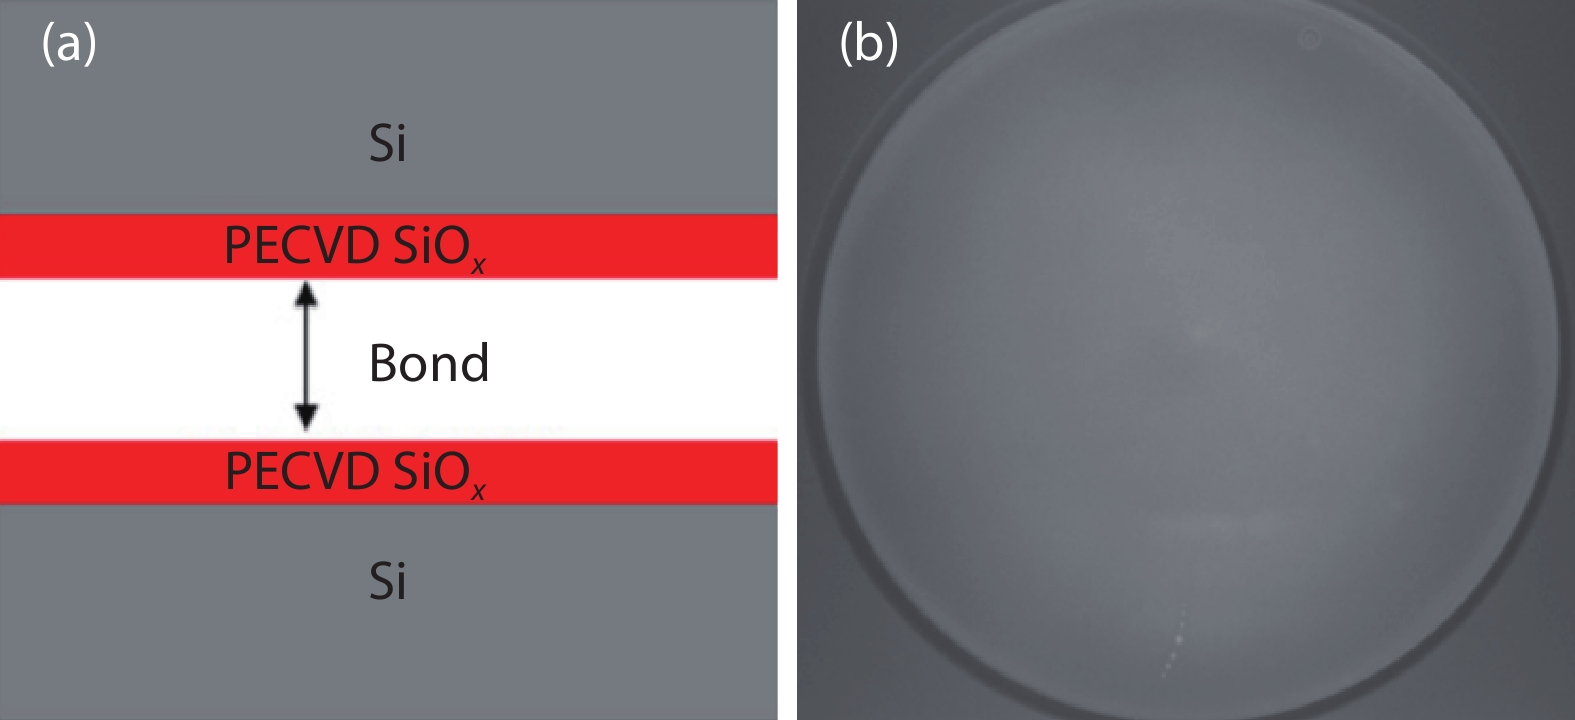 (Color online) (a) Schematic of the DWB process via SiO2 dielectric layers, and (b) shows the IR image of the bonded wafer.